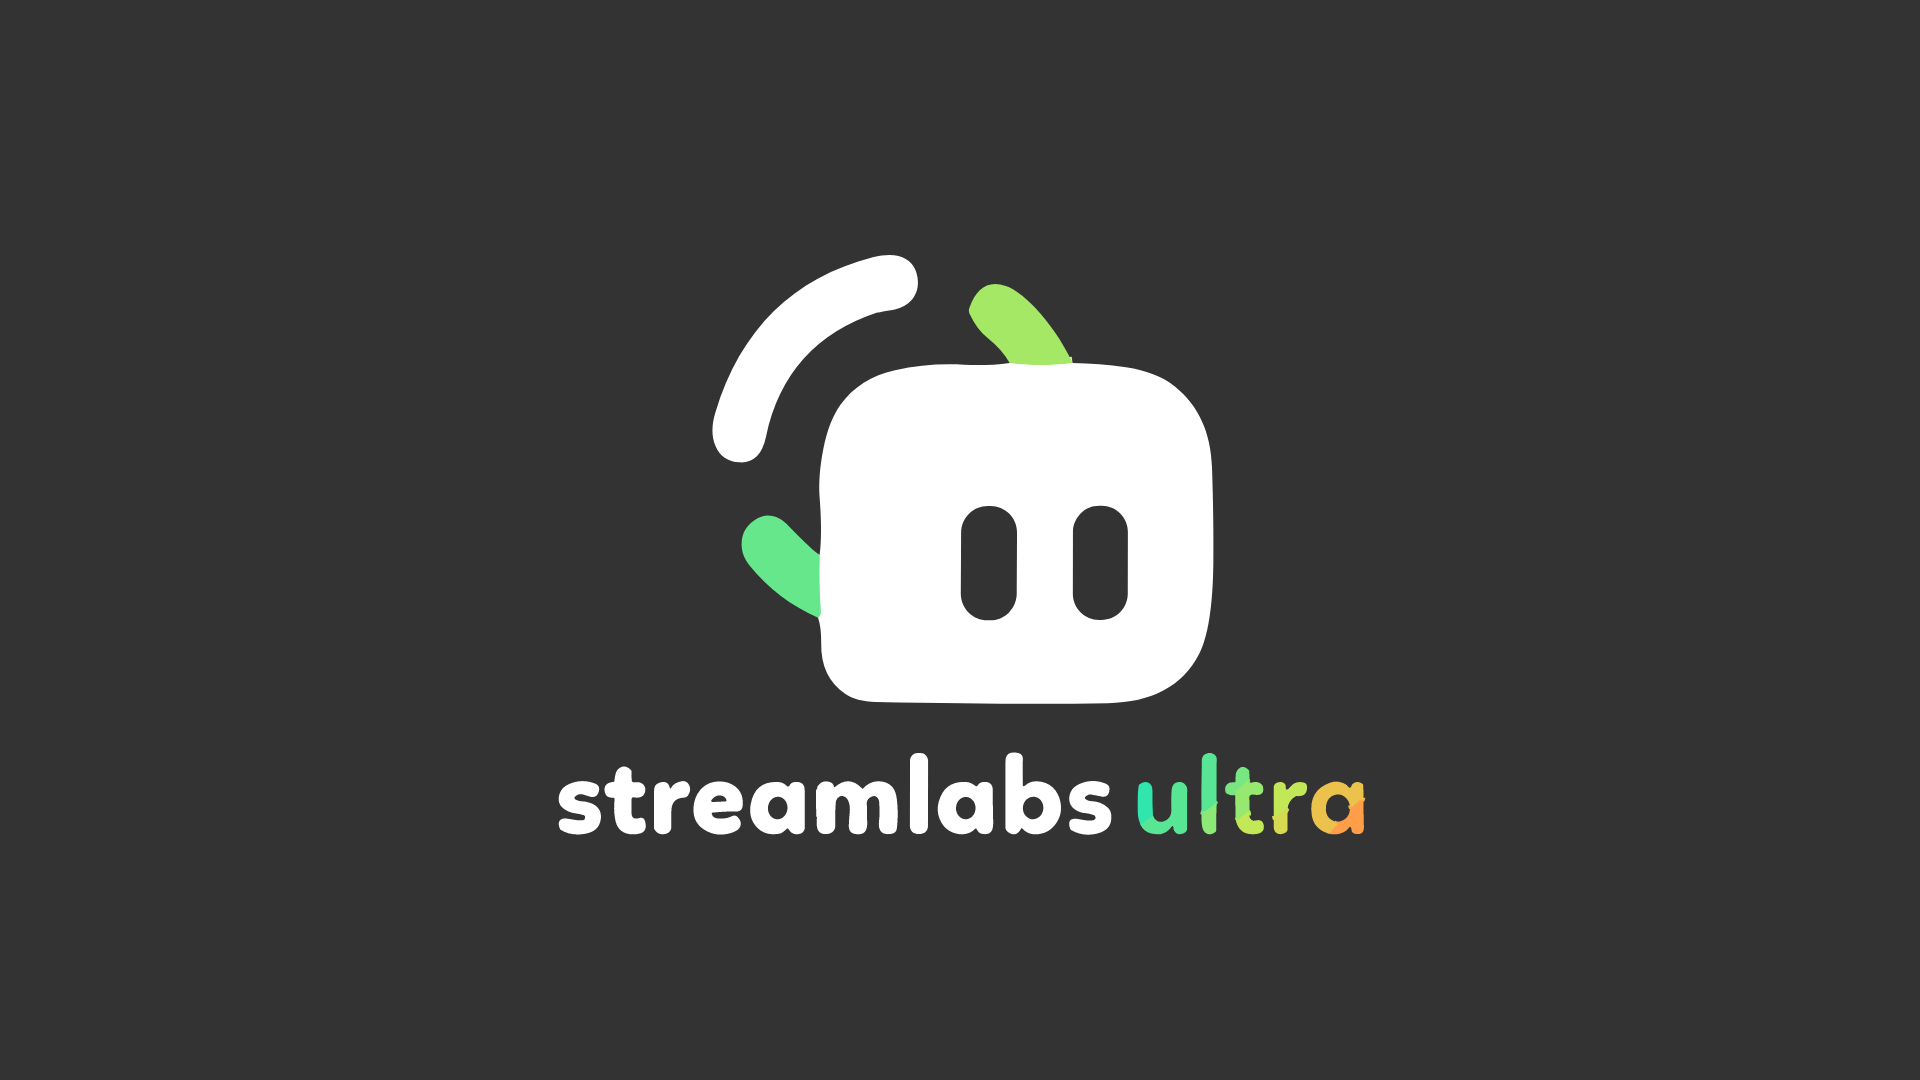 cupon descuento streamlabs ultra